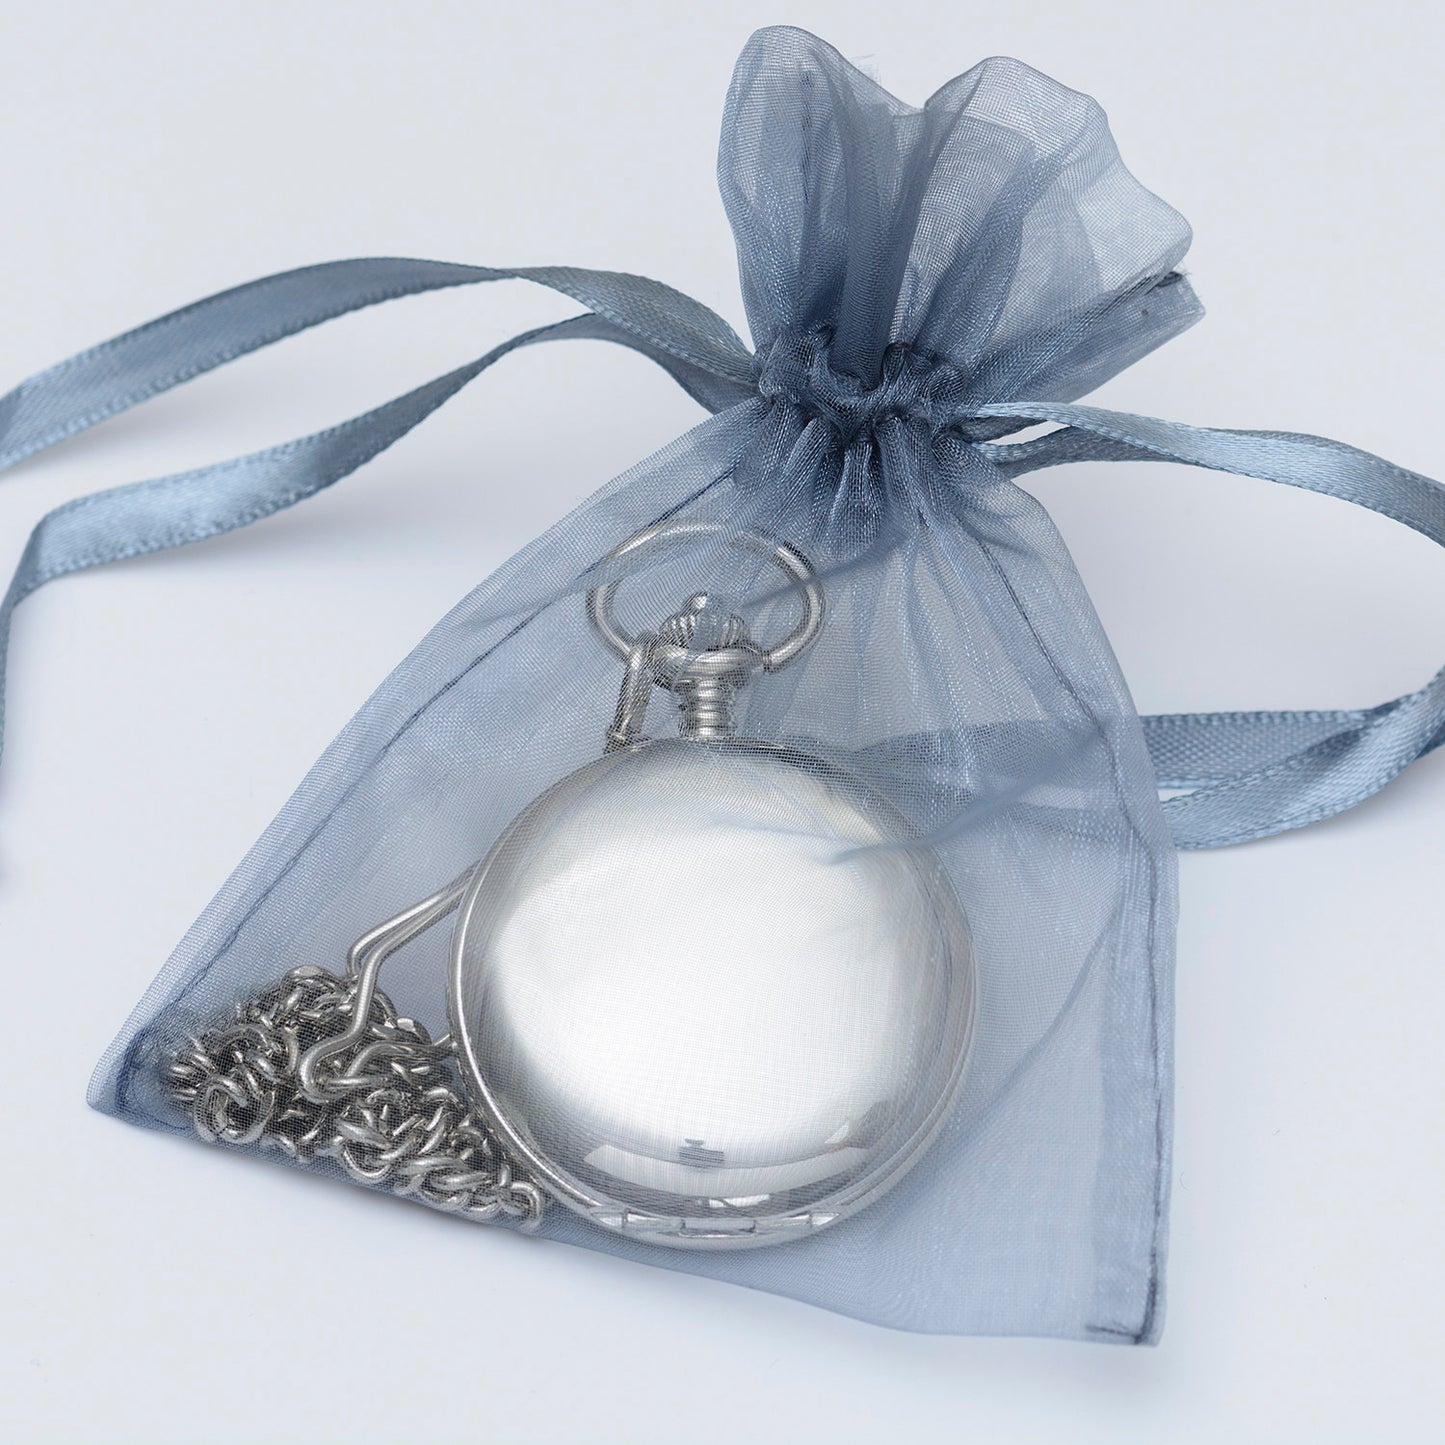 Engraved Pocket Watch For Father Of The Bride - Thank You